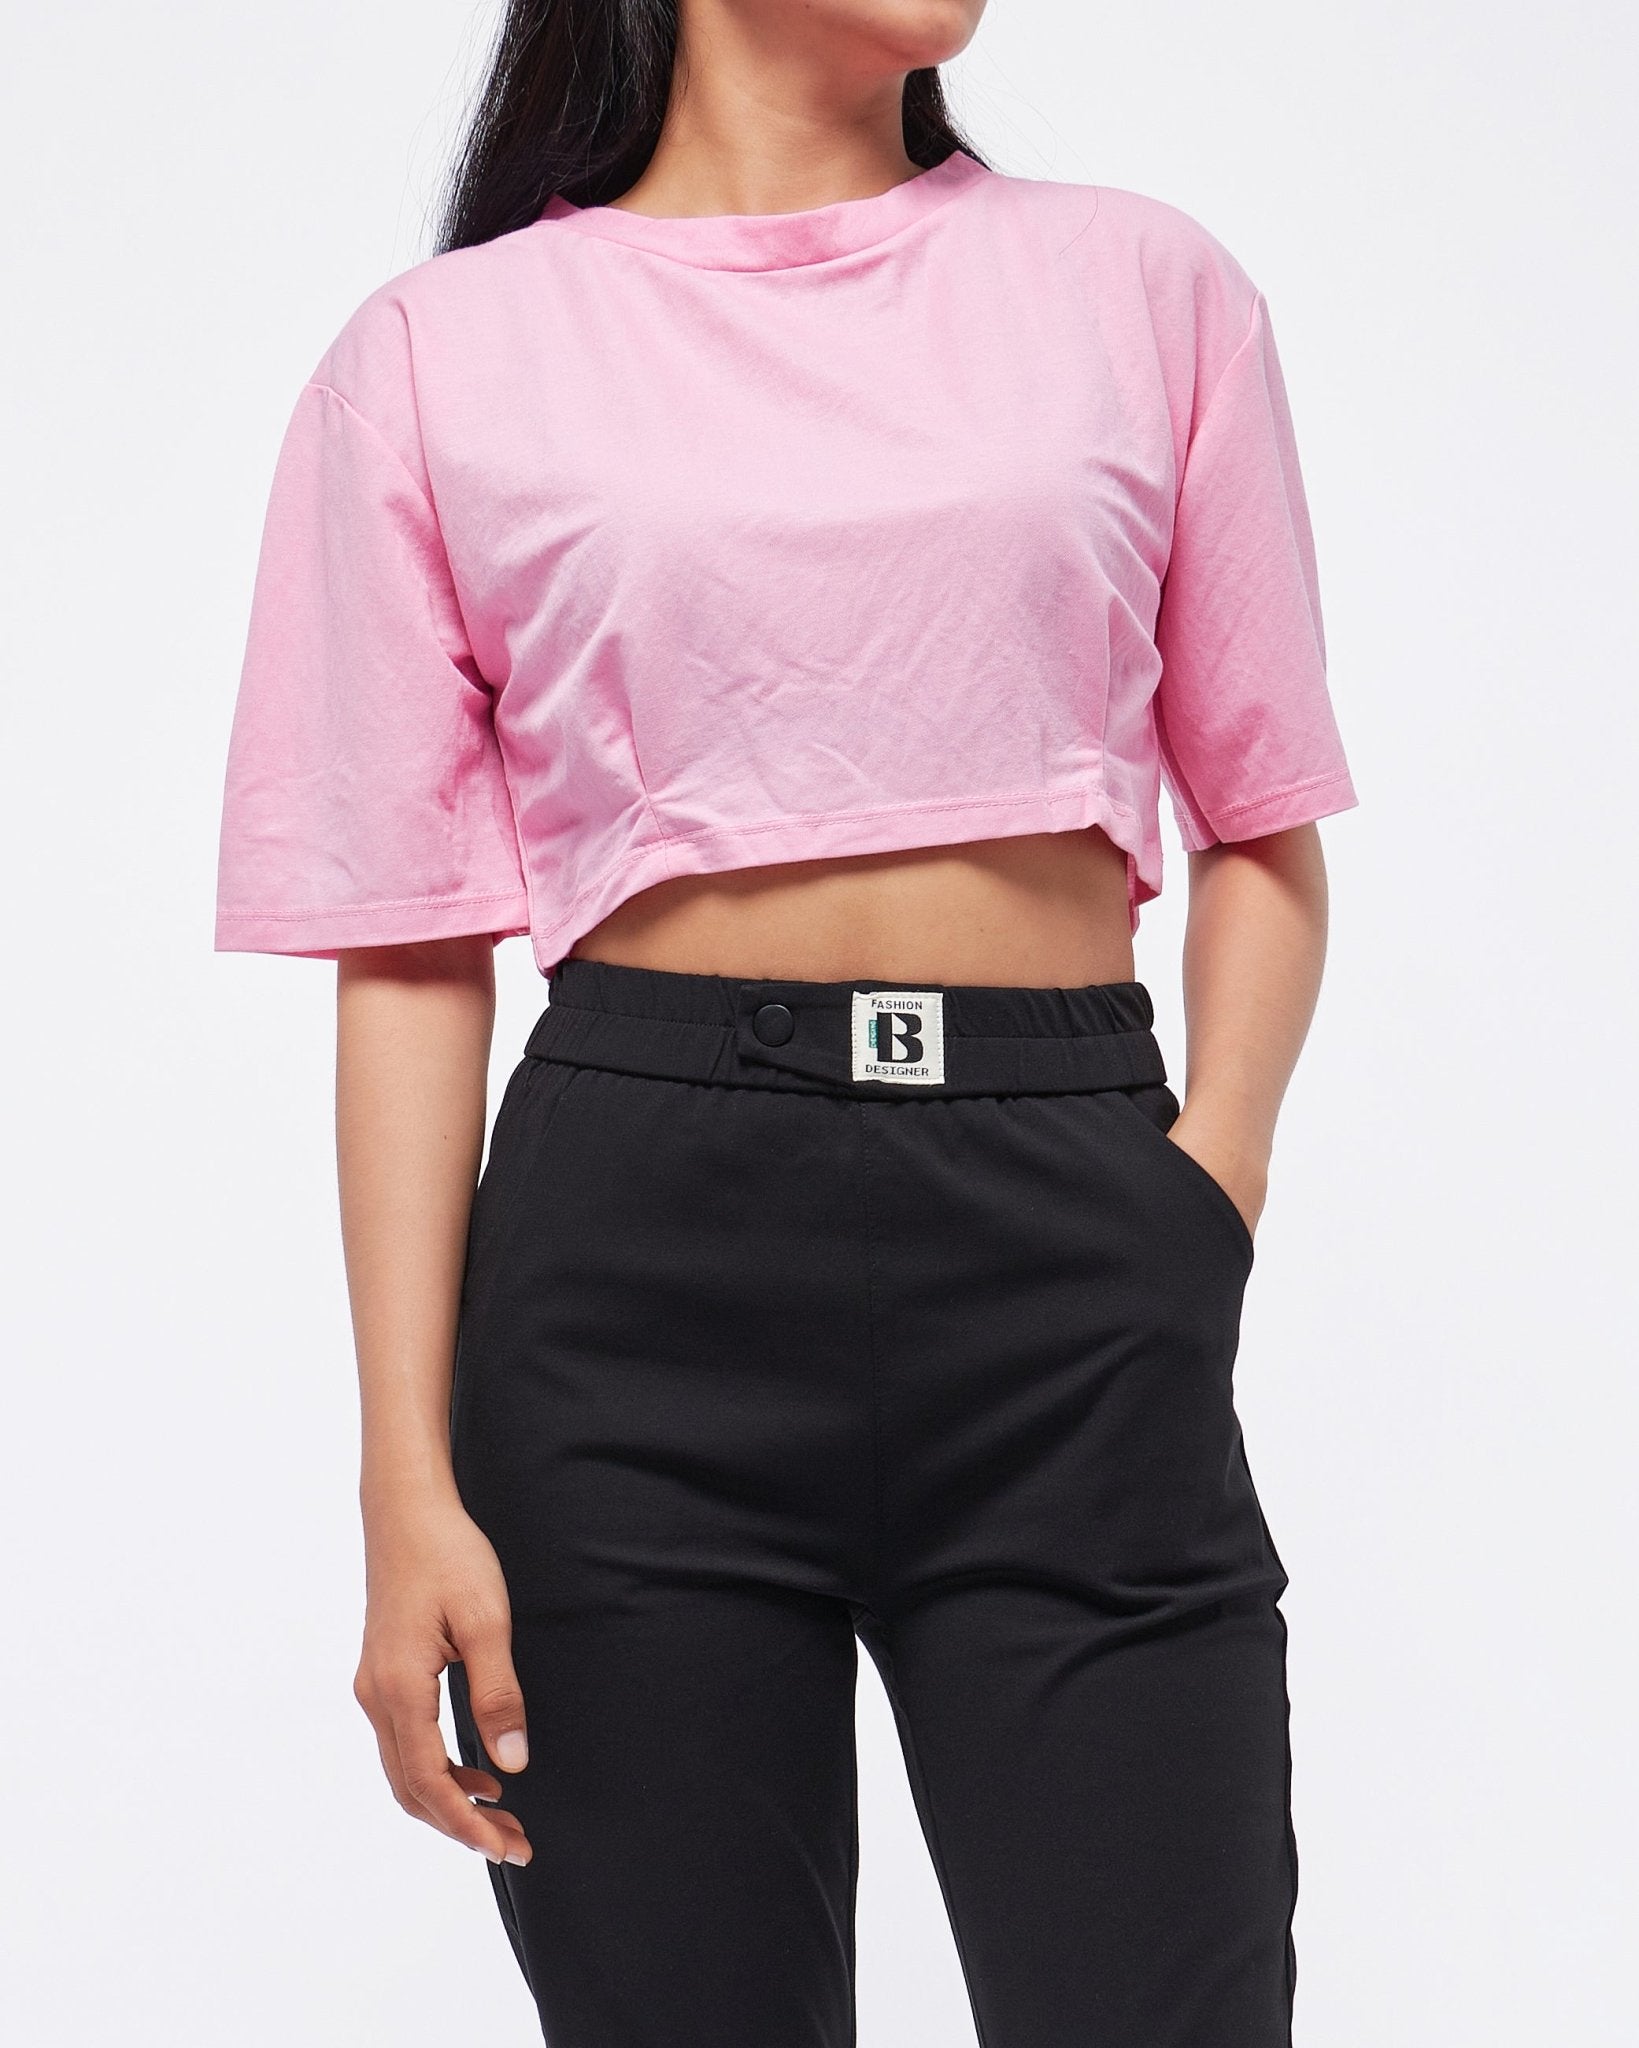 MOI OUTFIT-Candy Color Lady Crop Top 11.90